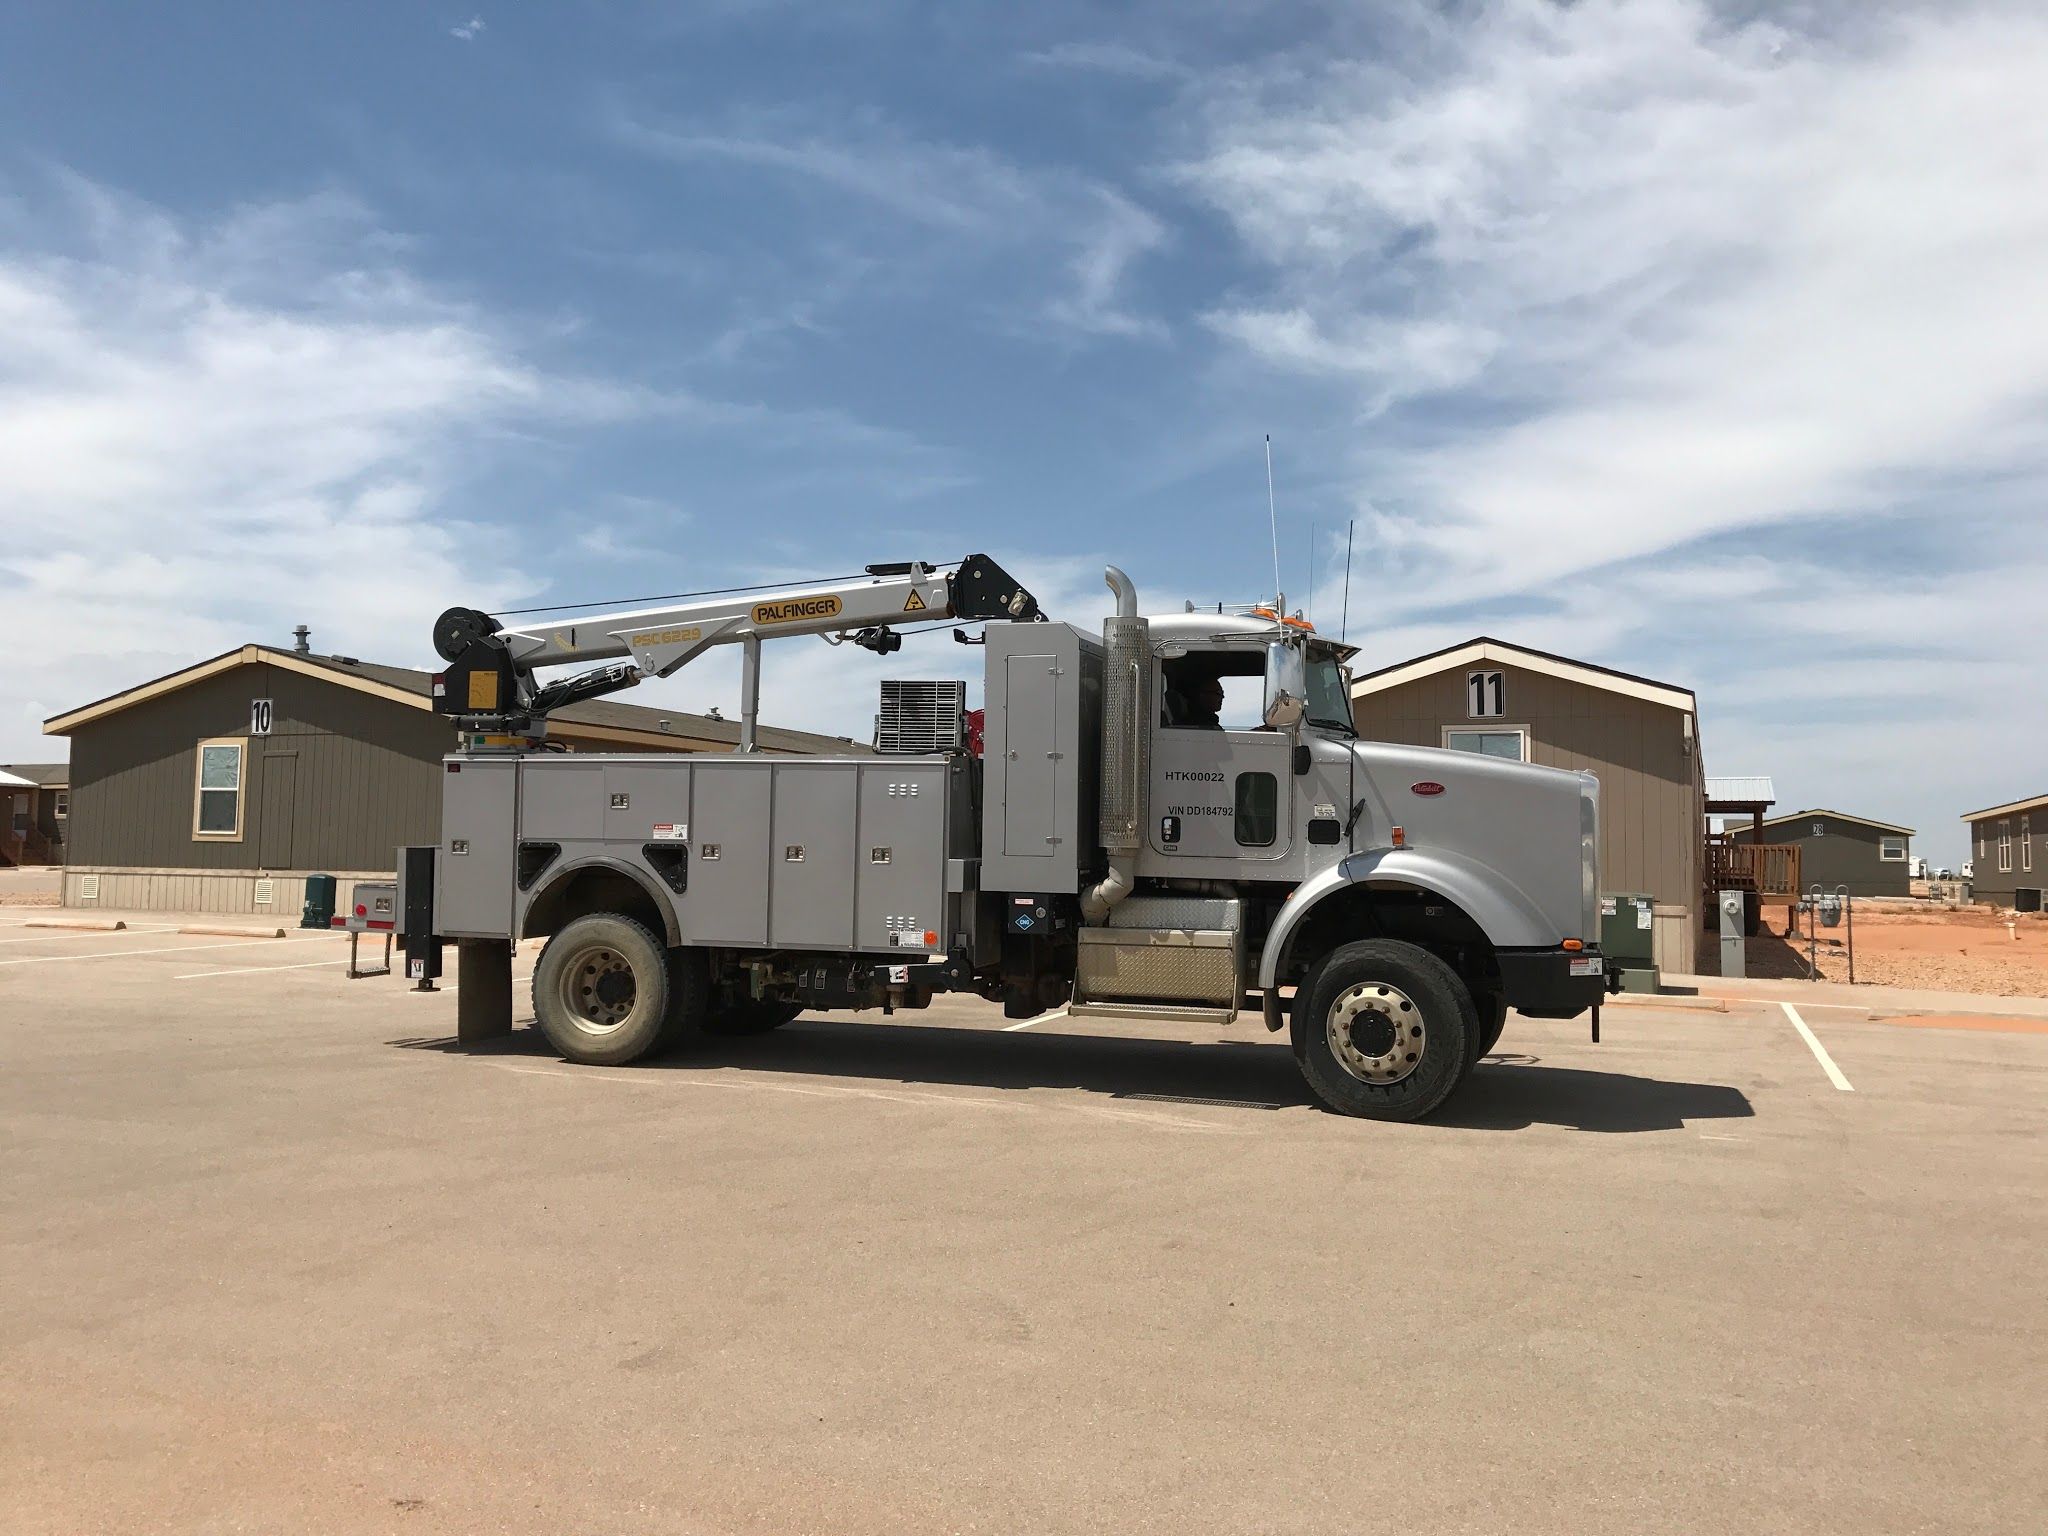 Services & Products Del Rio Truck and Equipment Inc in Chino Valley AZ